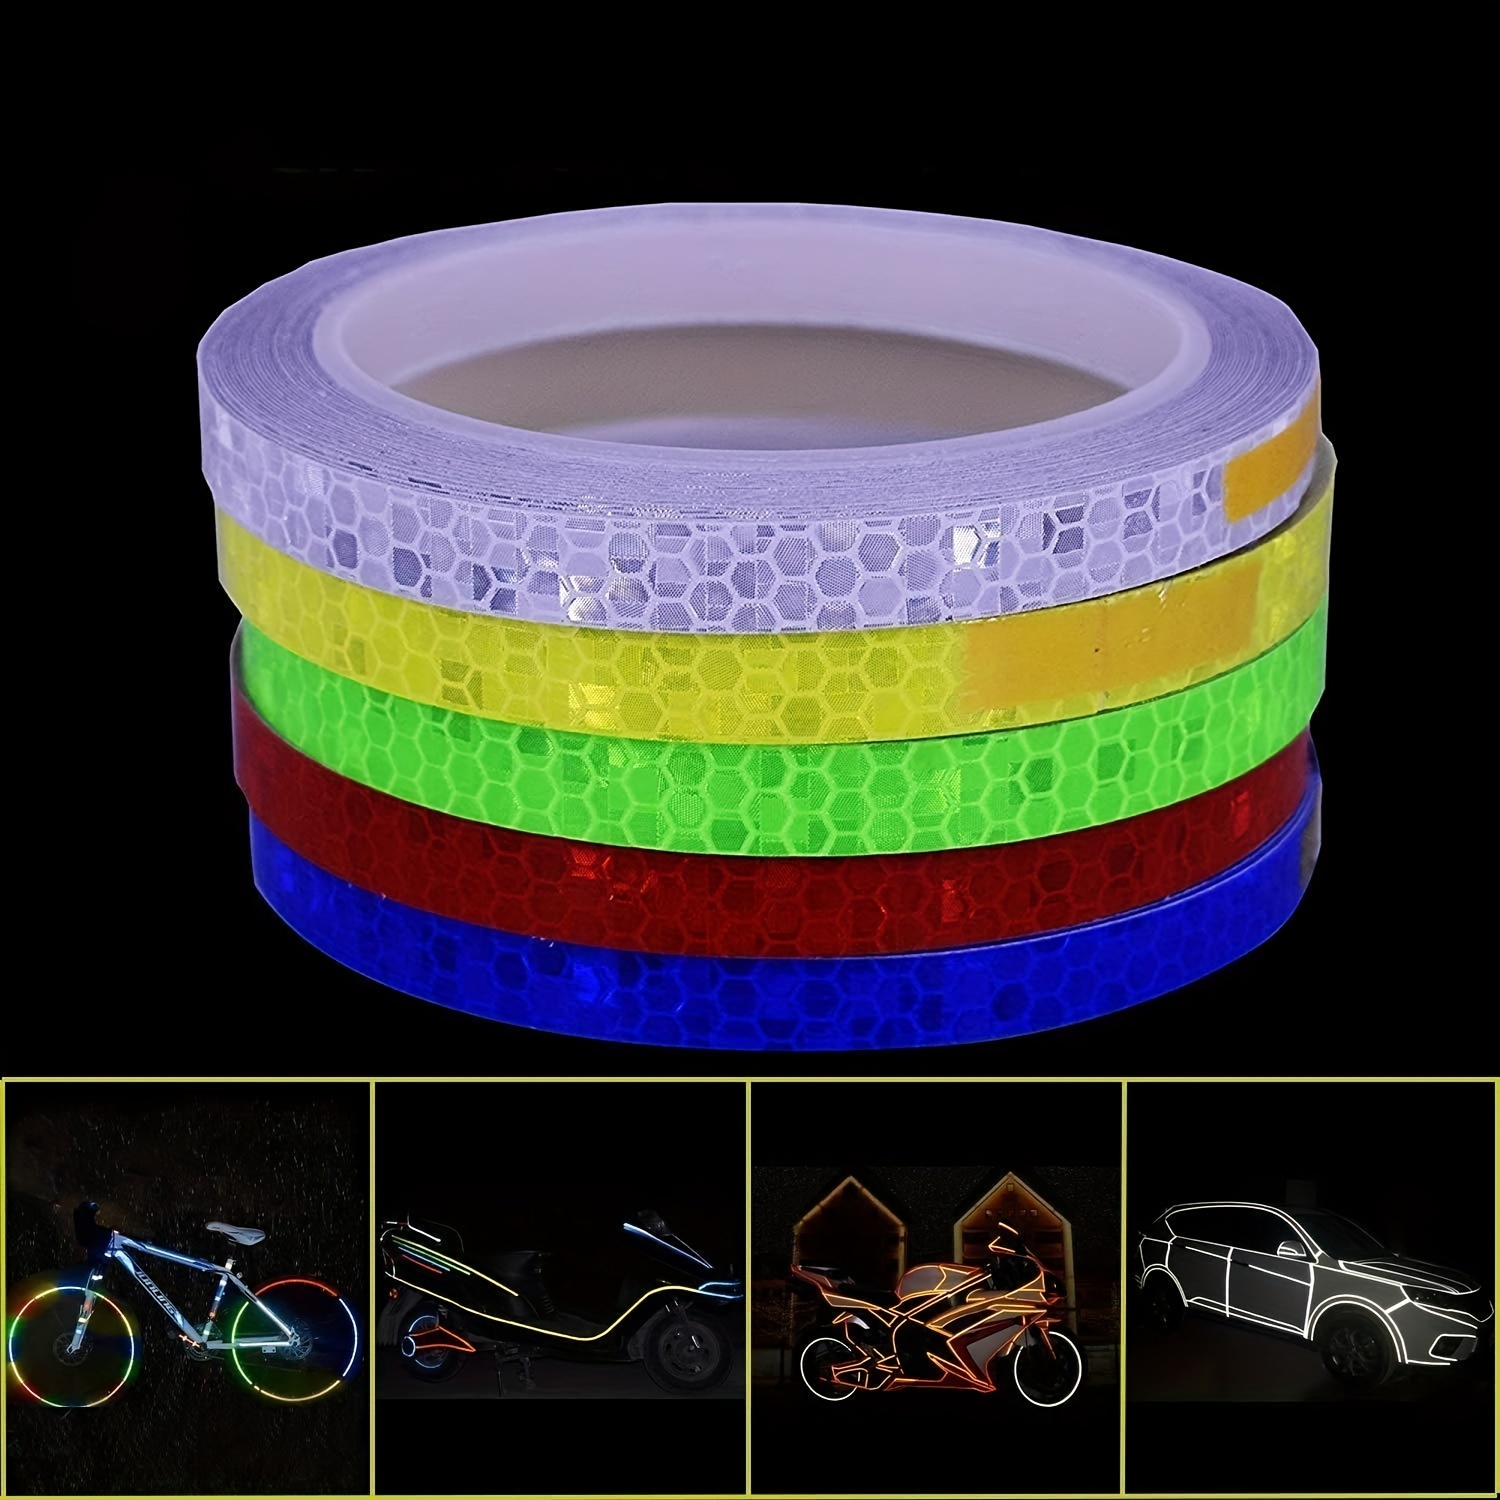 Reflective Tape, Outdoor Safety Warning Lighting Sticker, Waterproof Bike  Reflector Tape For Car, Bicycle, Motorcycle Rim Self-Adhesive DIY Decoration